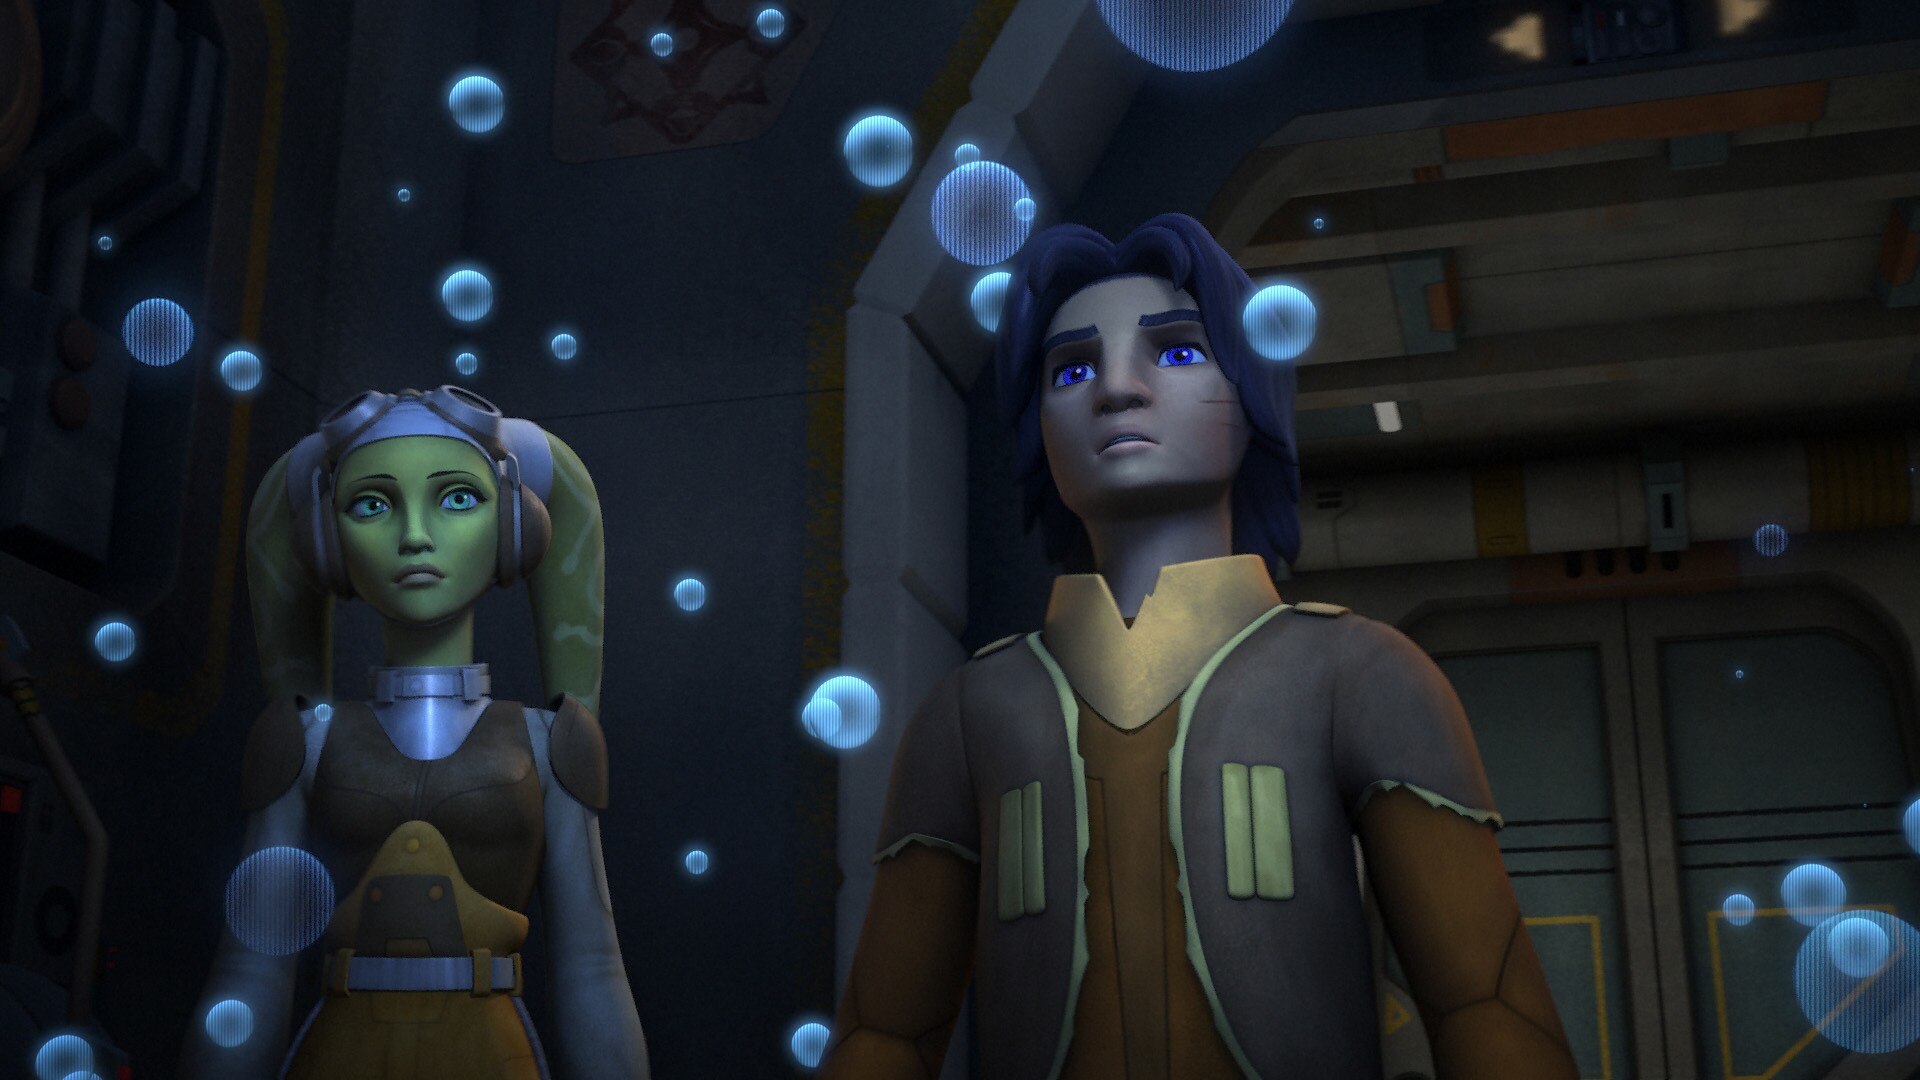 Shaken by the vision, Ezra believes his parents are alive and he must find them. Kanan and Hera r...